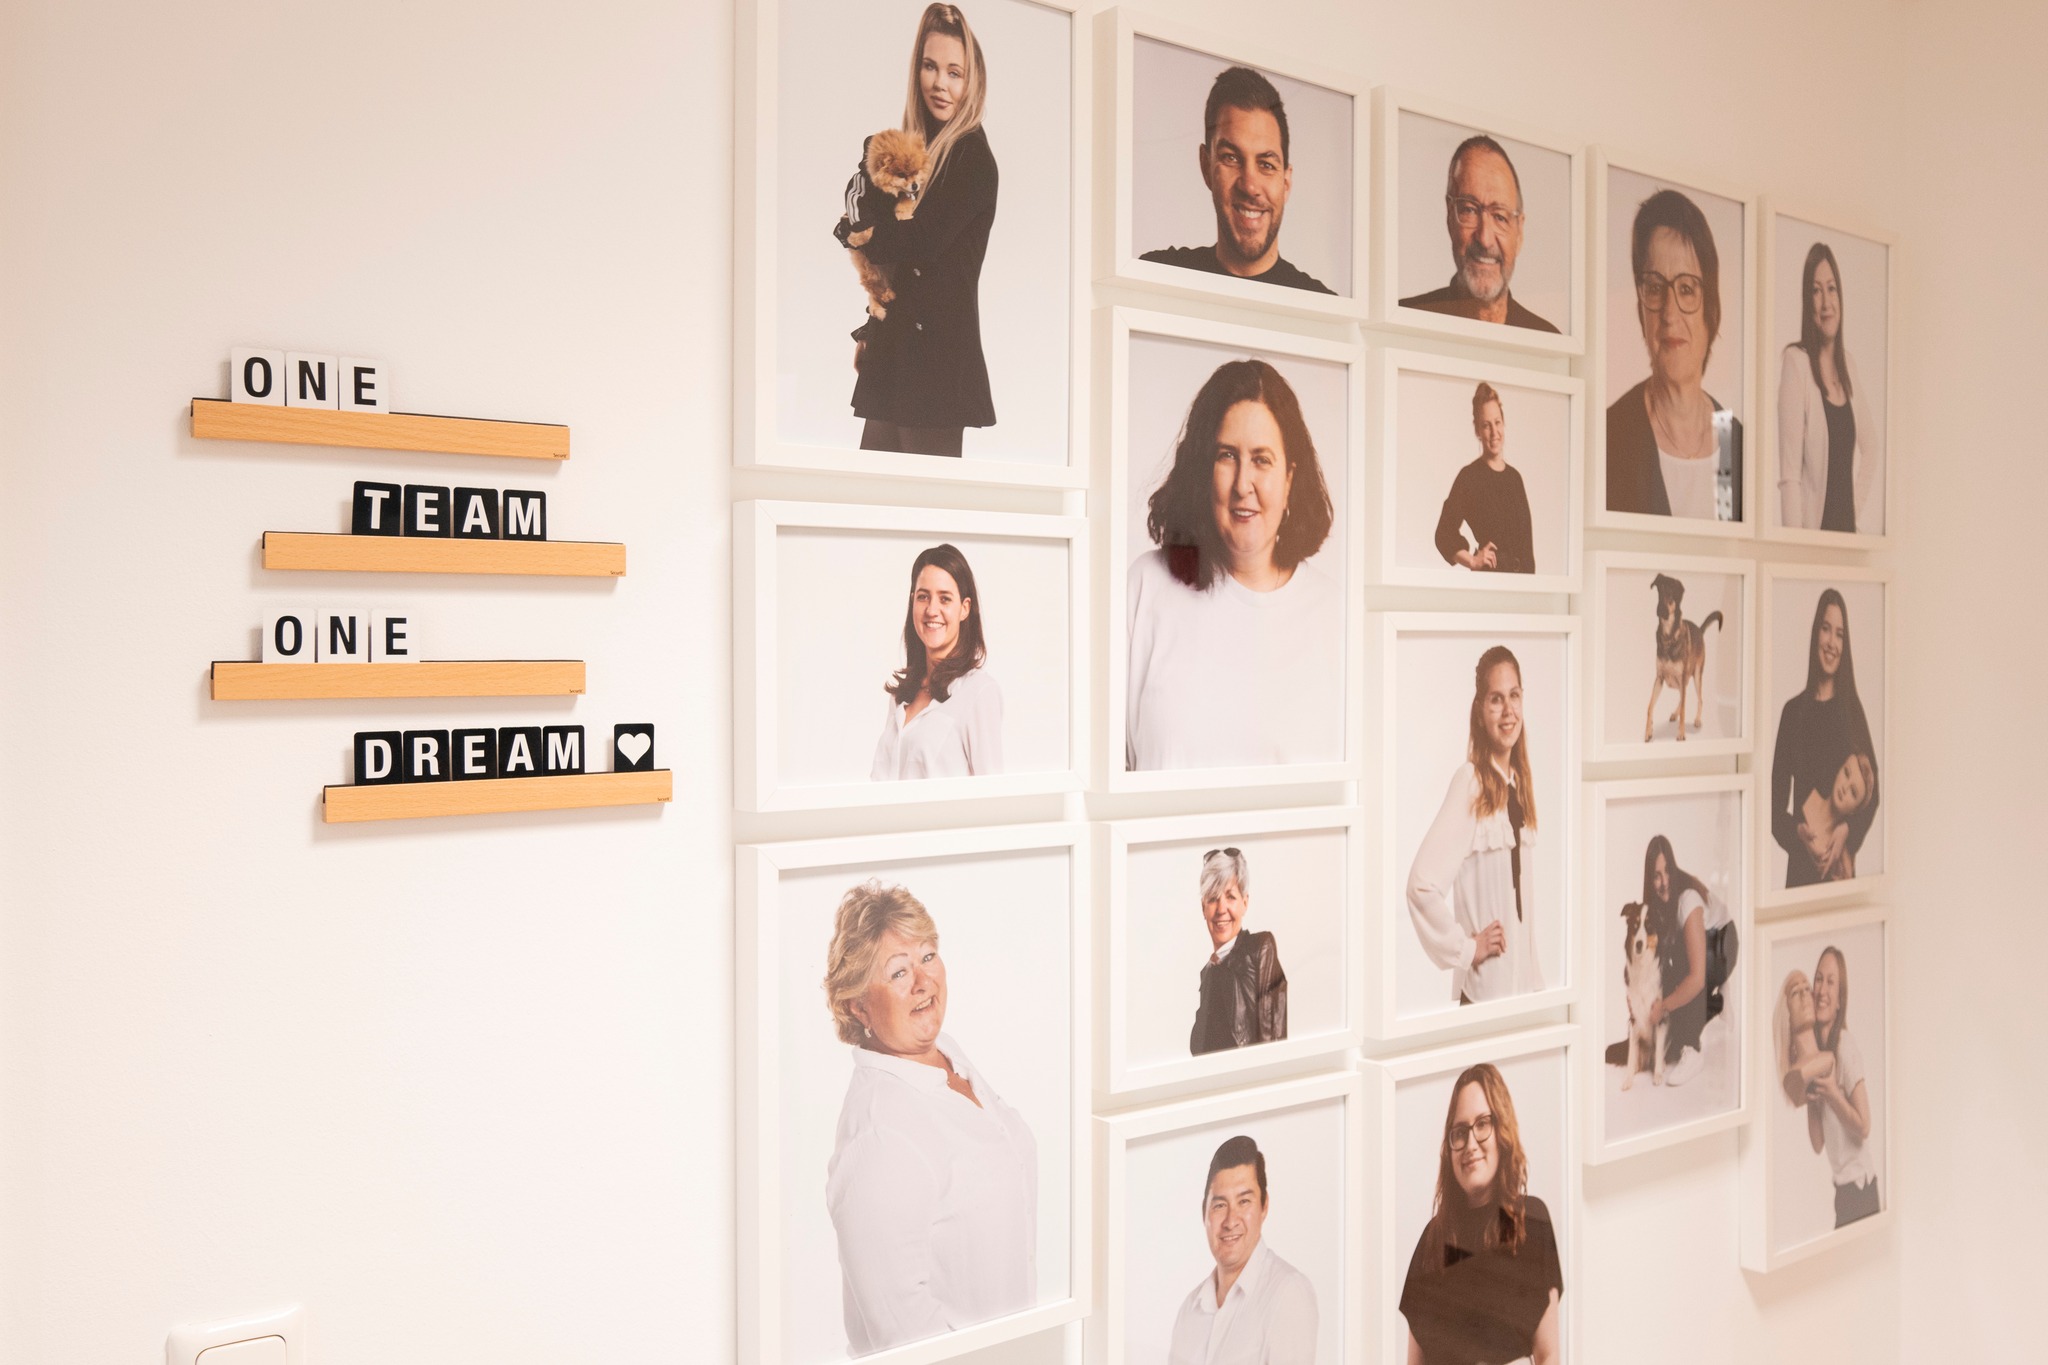 A white wall with several portraits of the L'IMAGE team in white picture frames. To the left of the picture frames hang four decorative wooden ledges, one word per ledge "ONE TEAM ONE DREAM". 